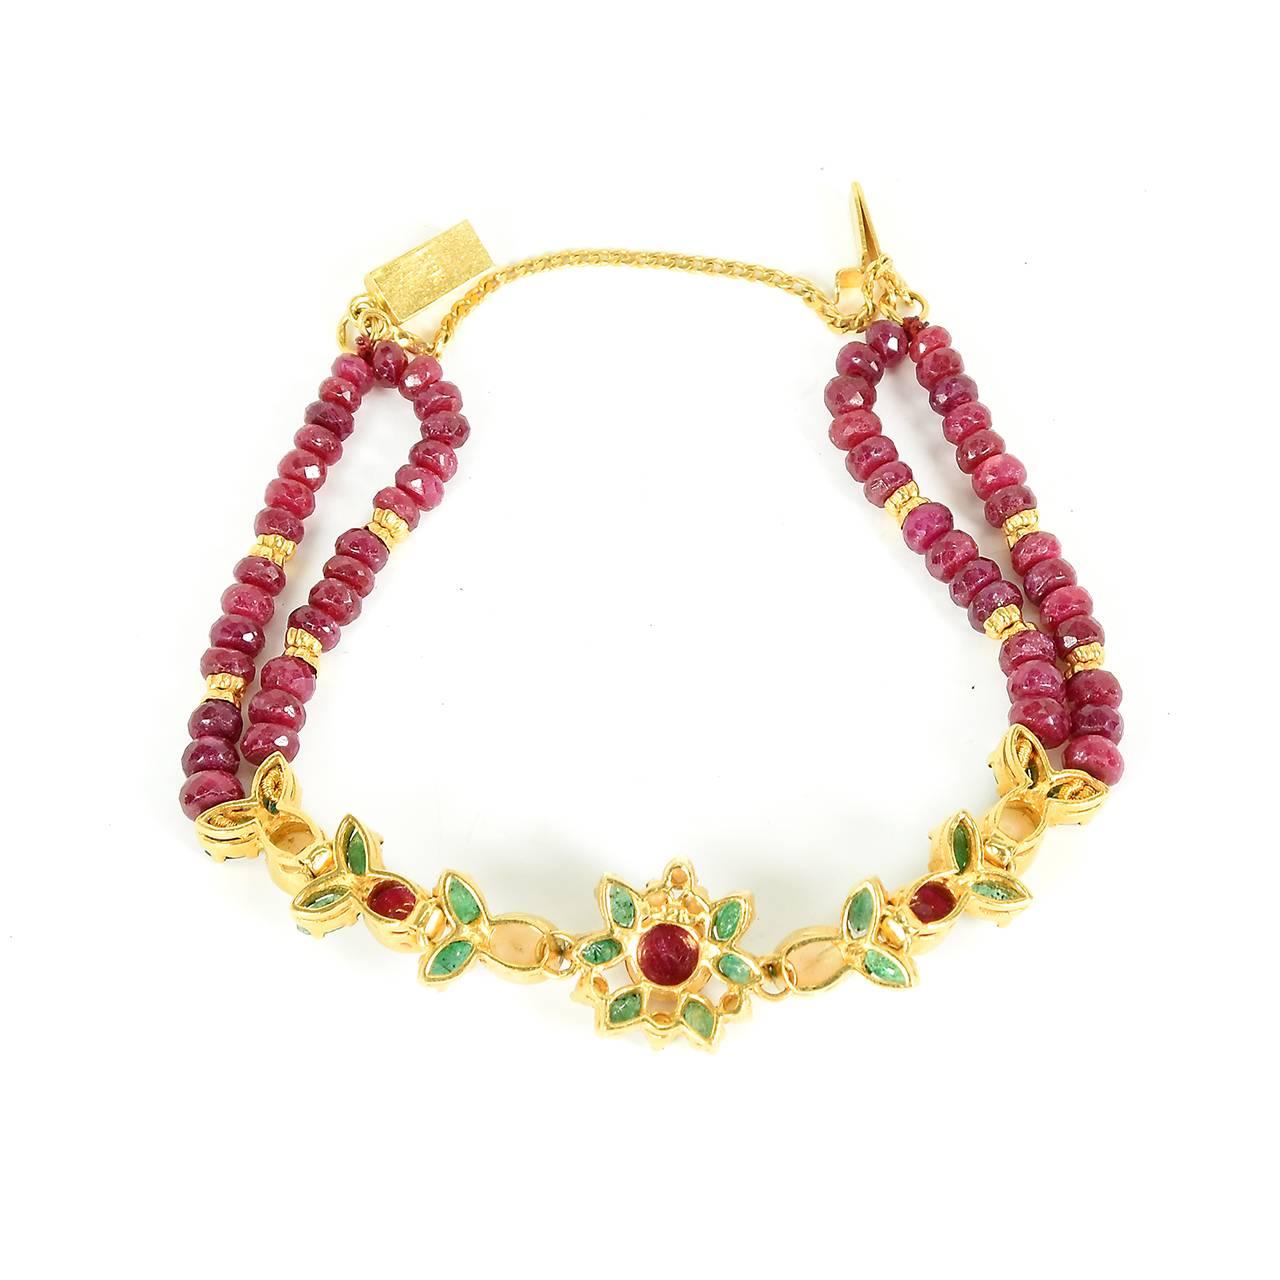 Anglo-Indian Indian Ruby, Emerald and Pearl Necklet, Earrings and Bracelet For Sale